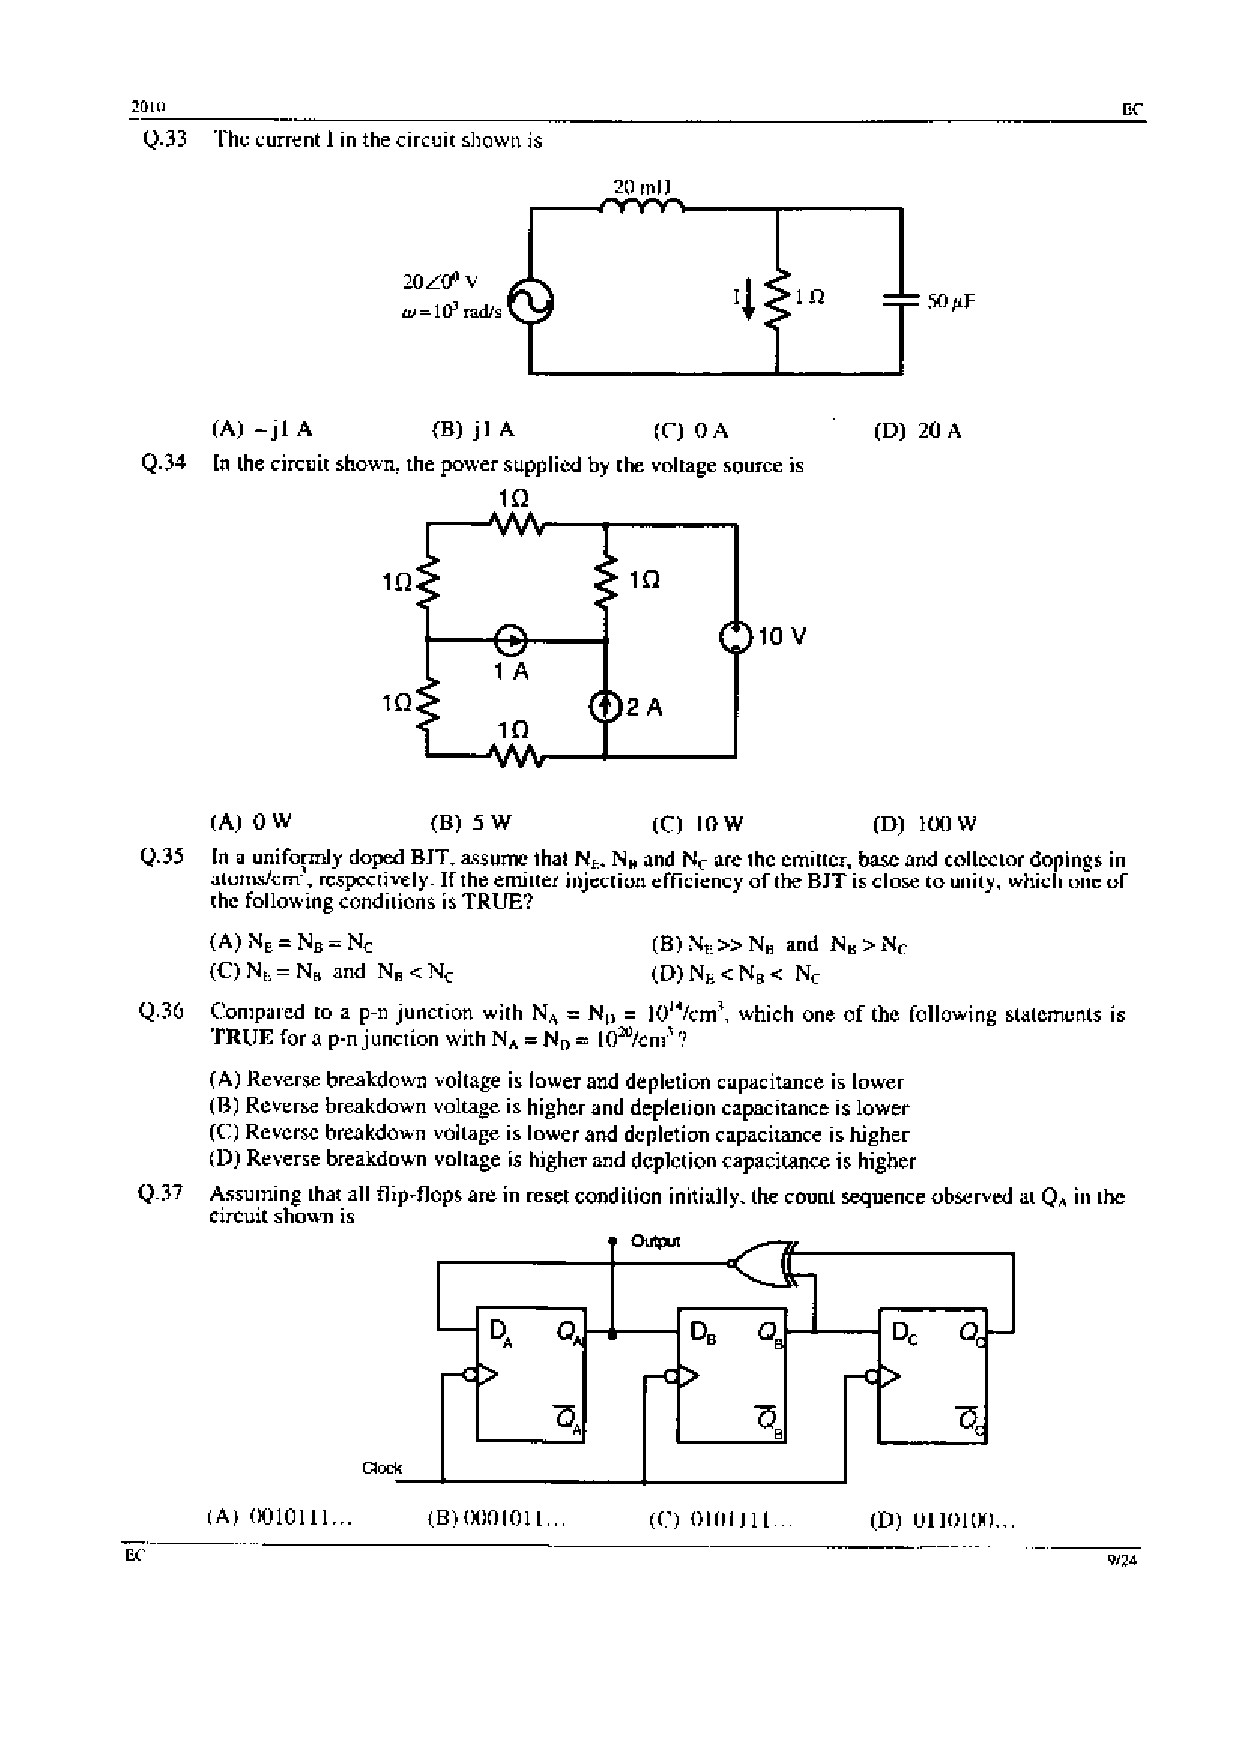 GATE Exam Question Paper 2010 Electronics and Communication Engineering 9